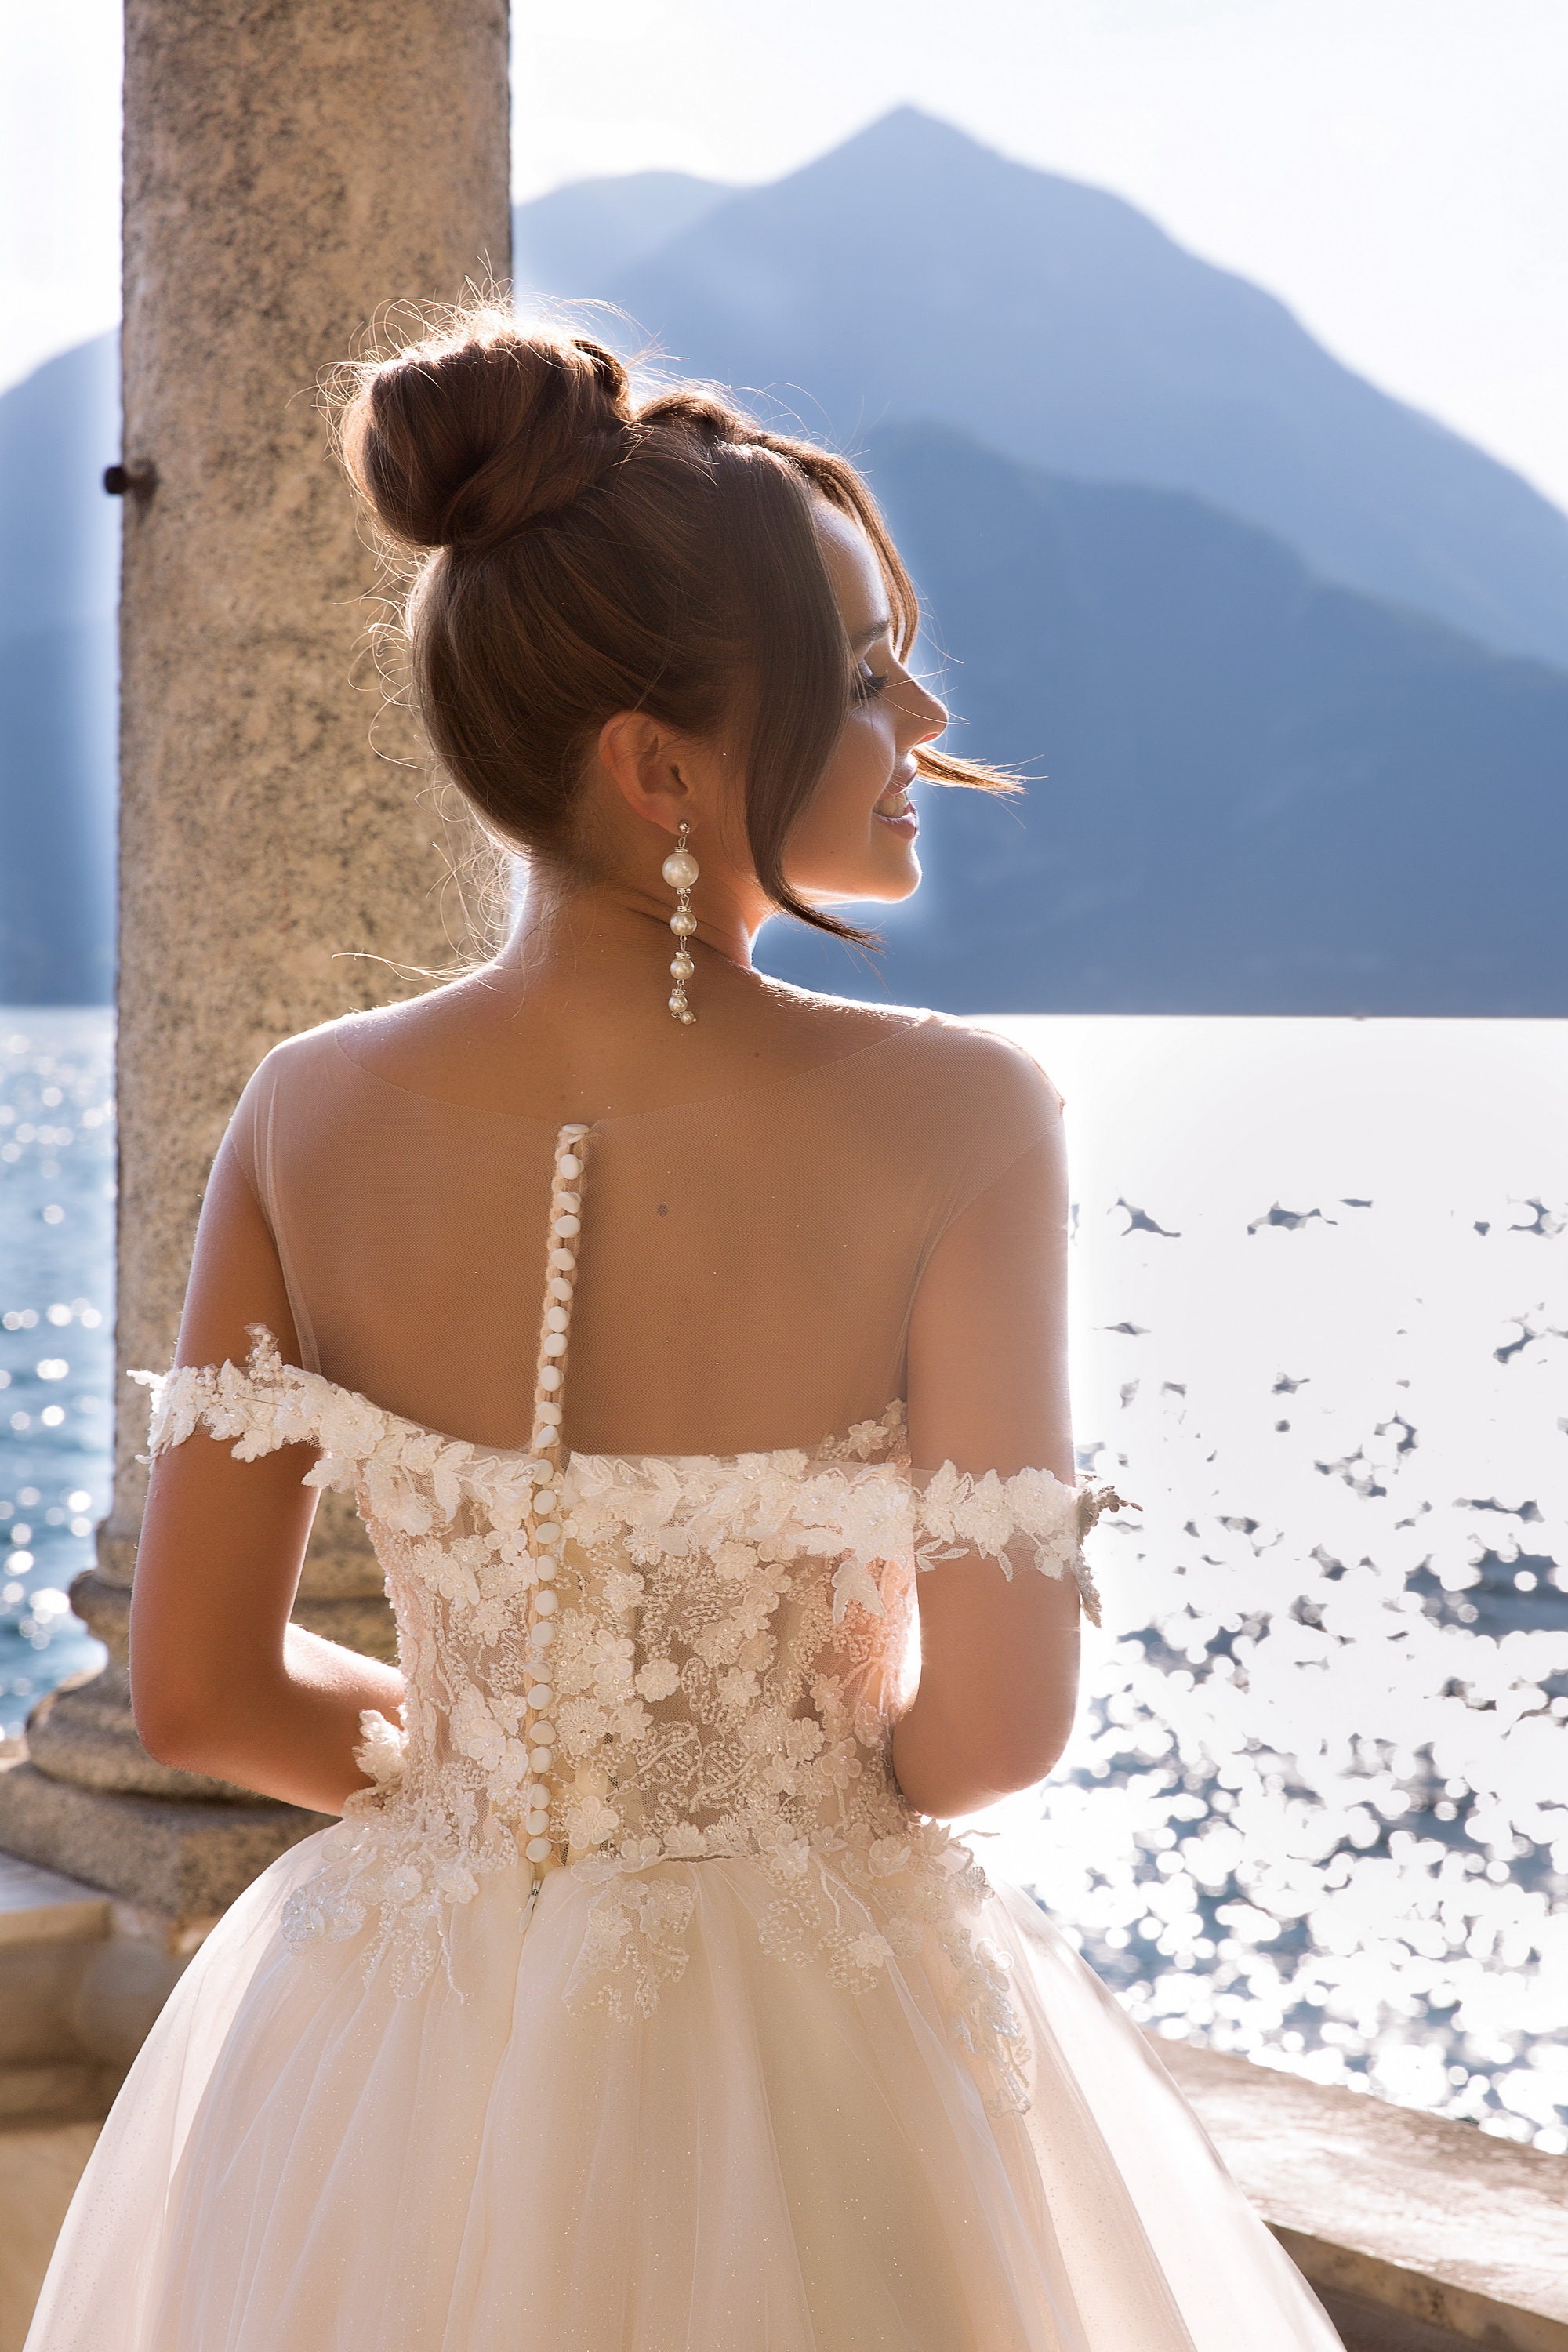 Dream Wedding Dress. Delicate Dress With a Tulle Skirt and Guipure